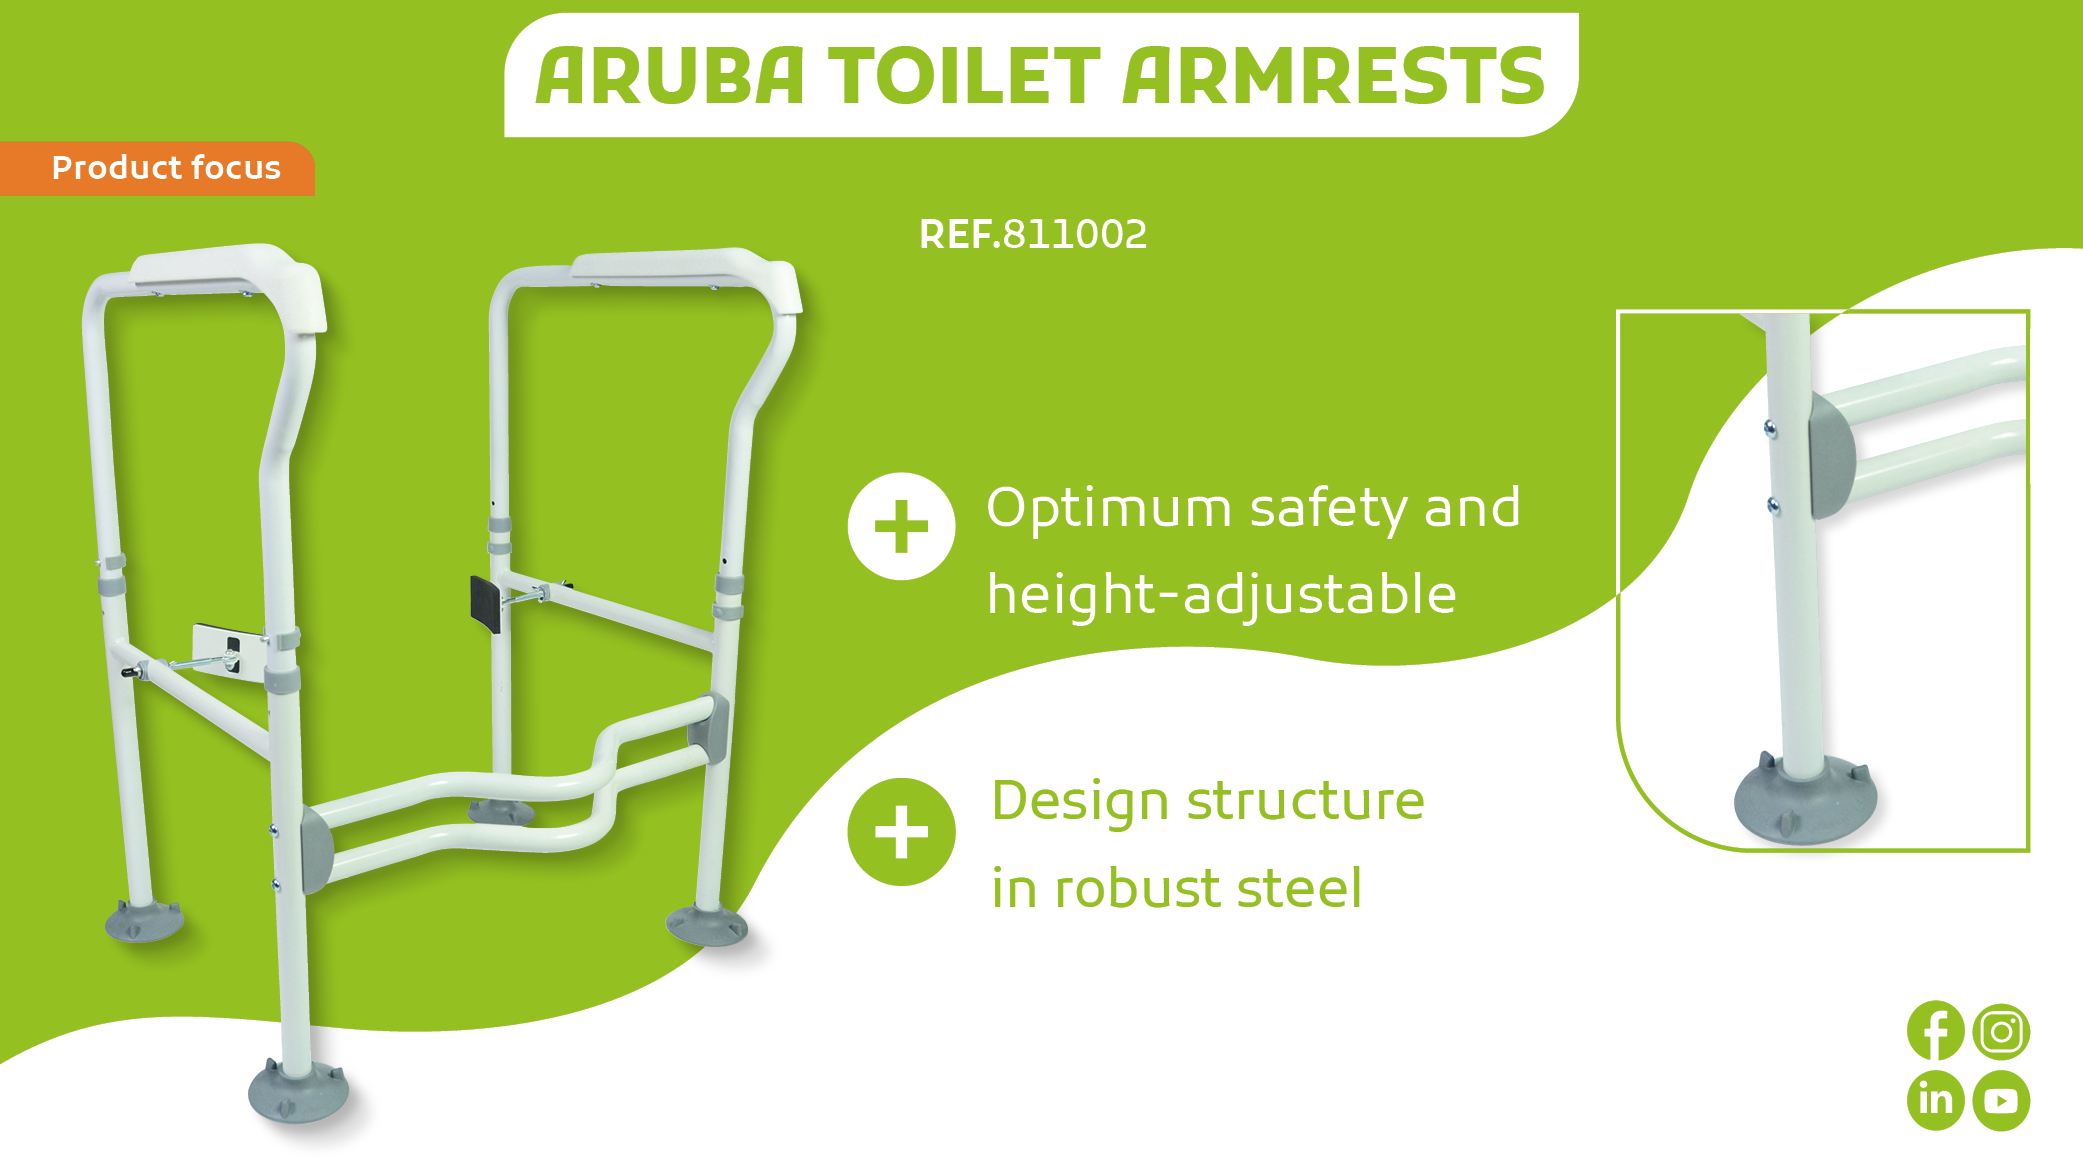 Discover our Aruba toilet armrests